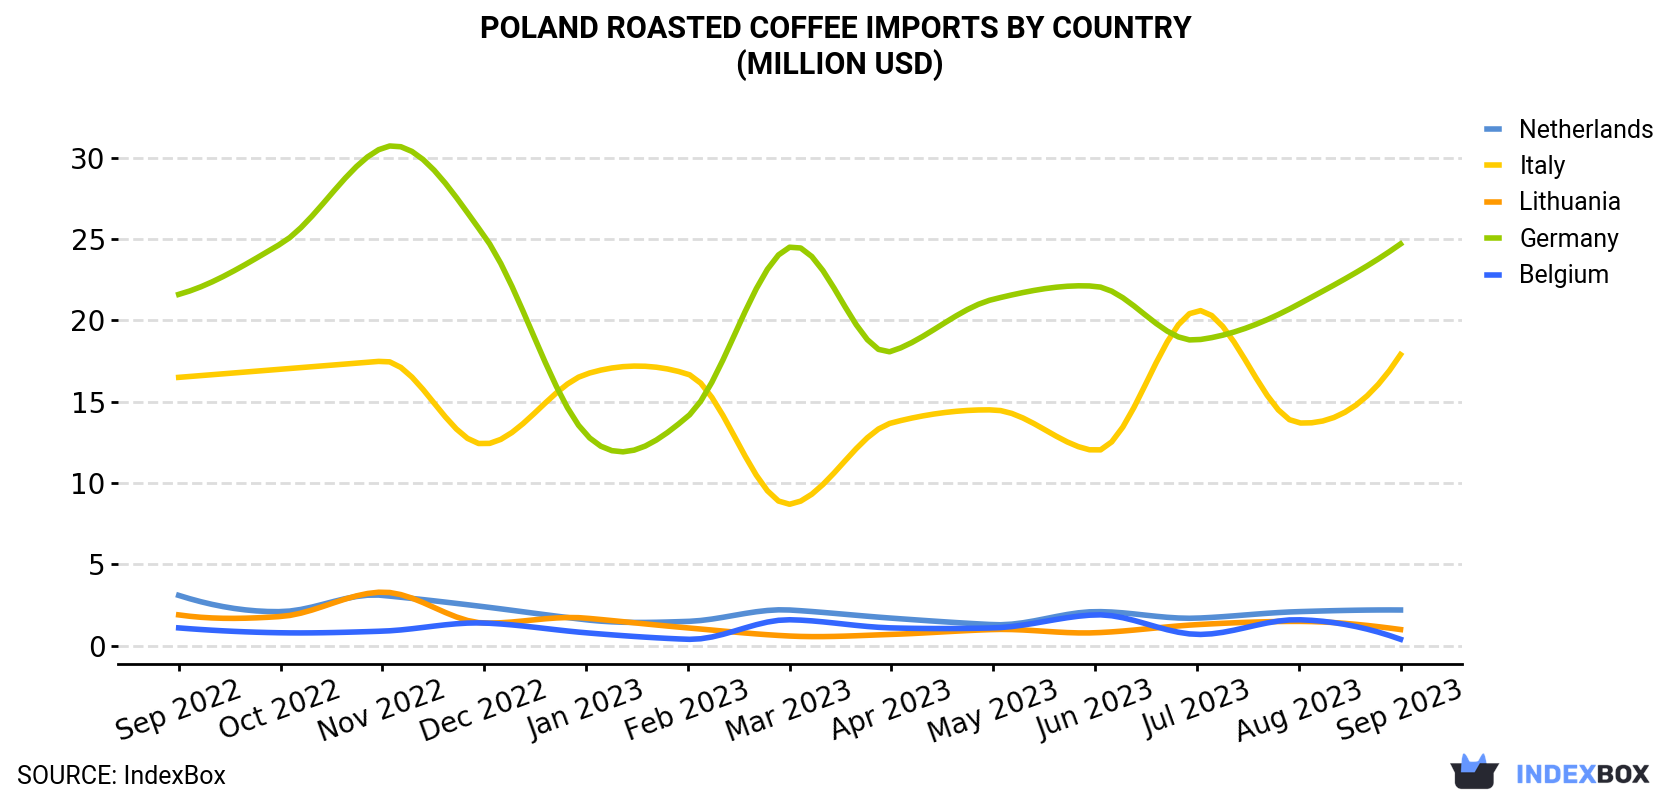 Poland Roasted Coffee Imports By Country (Million USD)